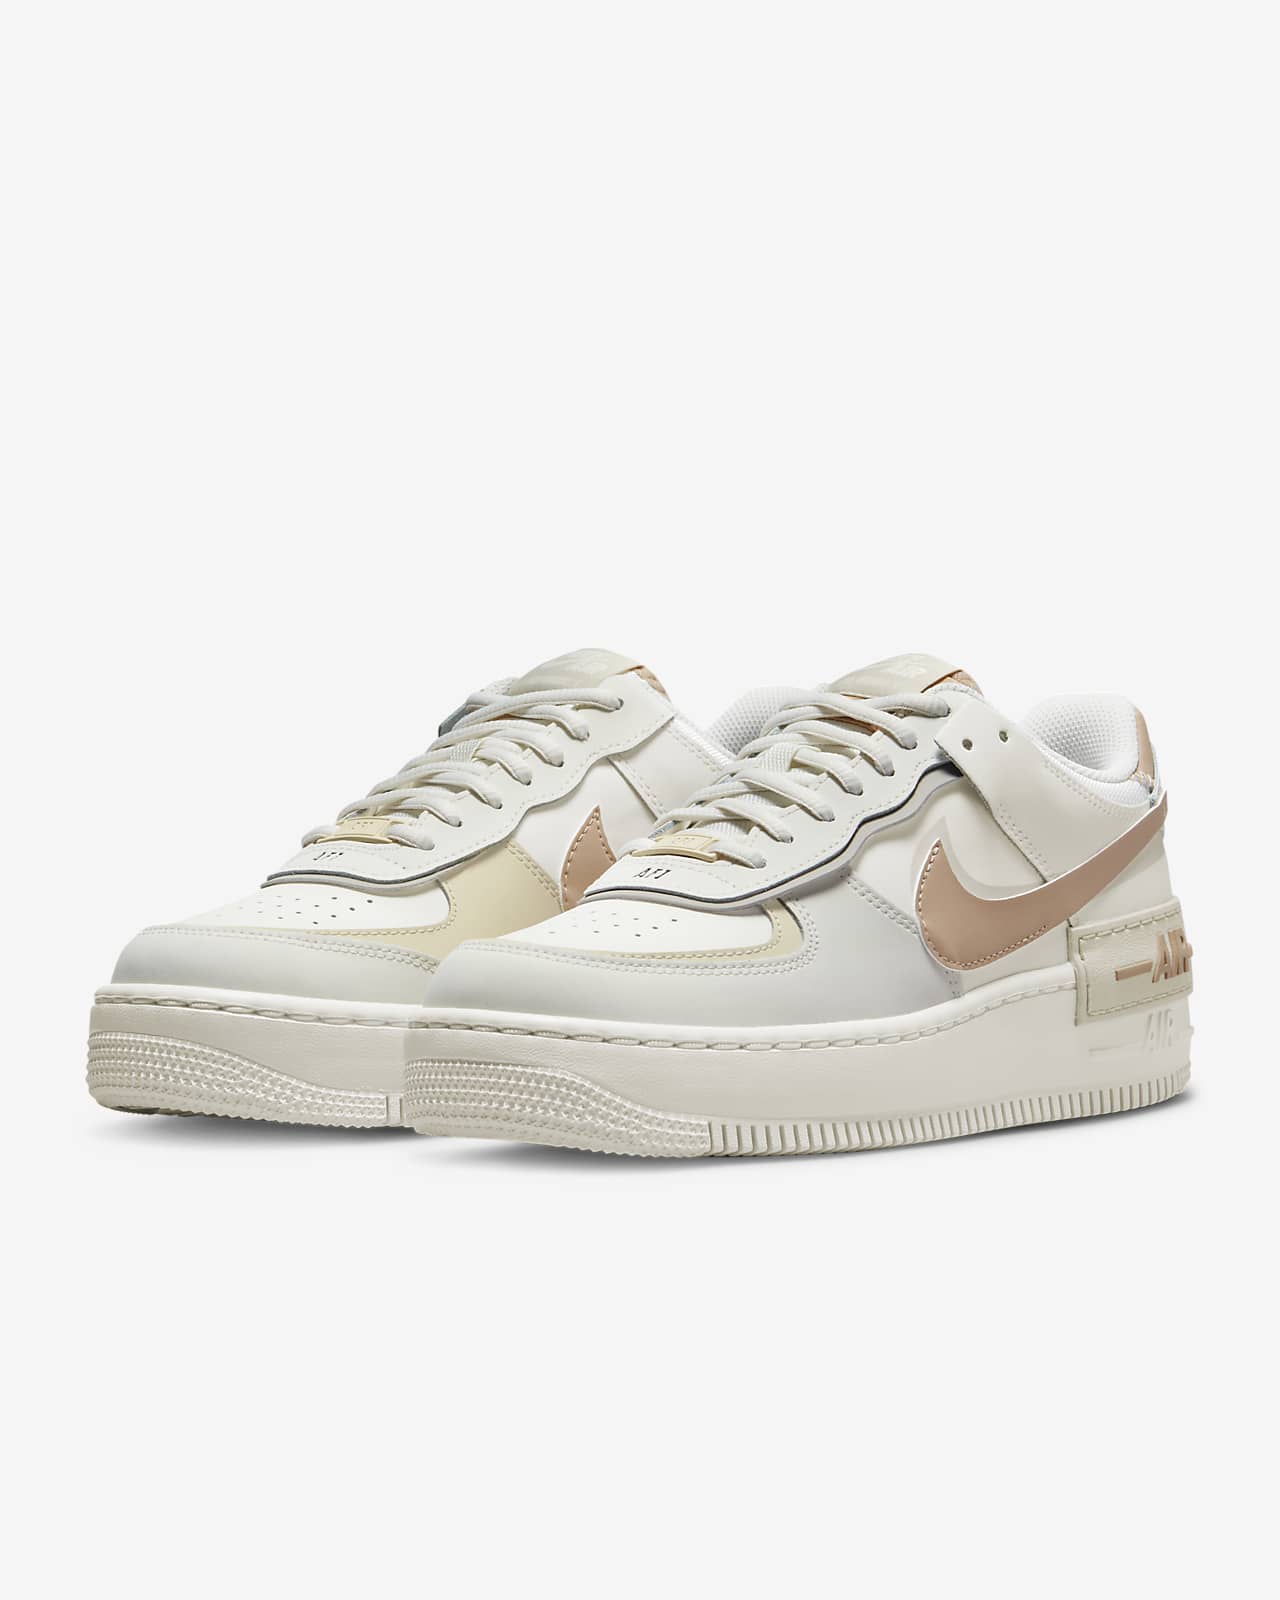 Nike AF1 Shadow Women's Shoes.